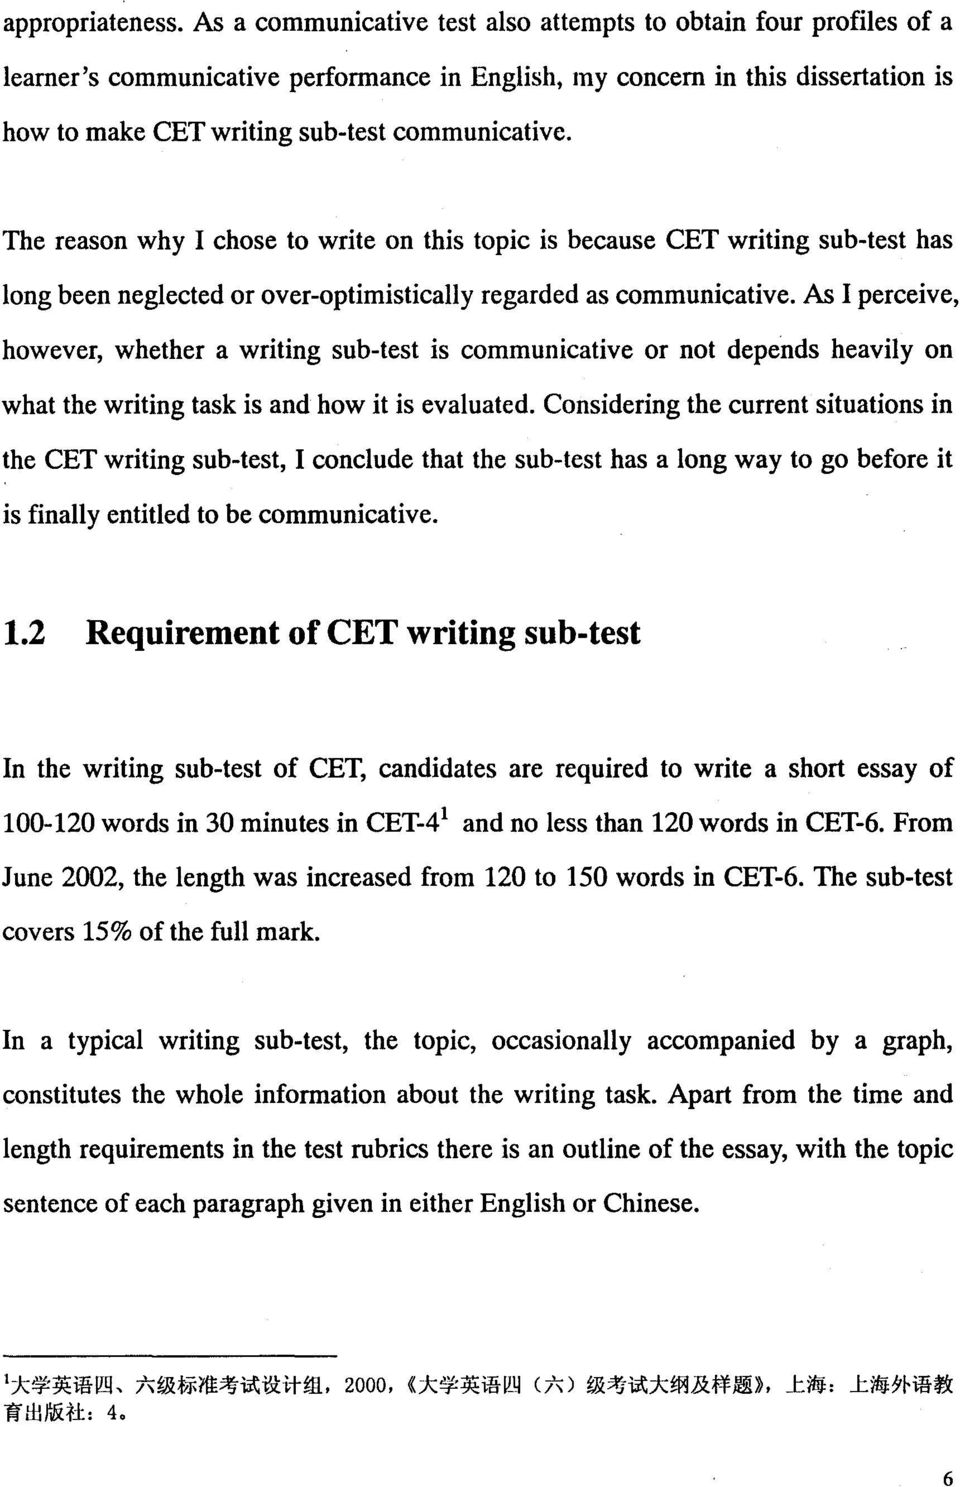 The reason why I chose to write on this topic is because CET writing sub-test has long been neglected or over-optimistically regarded as communicative.